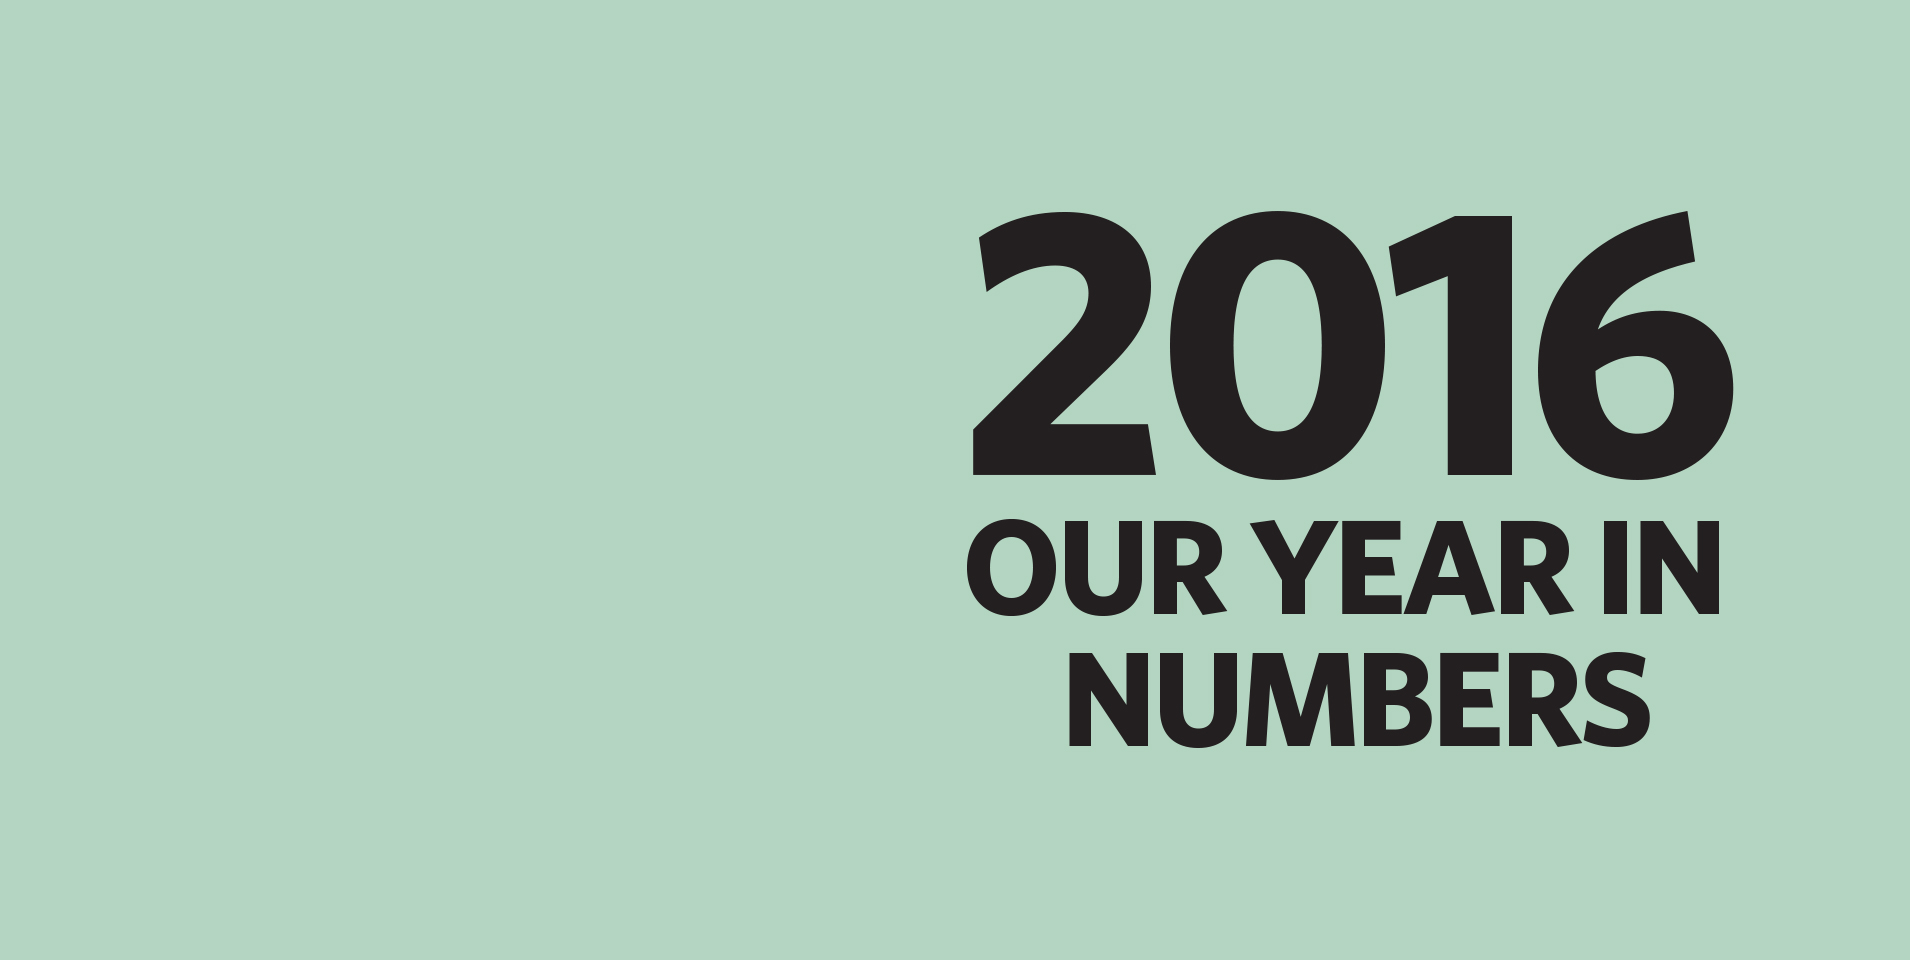 2016: Our year in numbers.